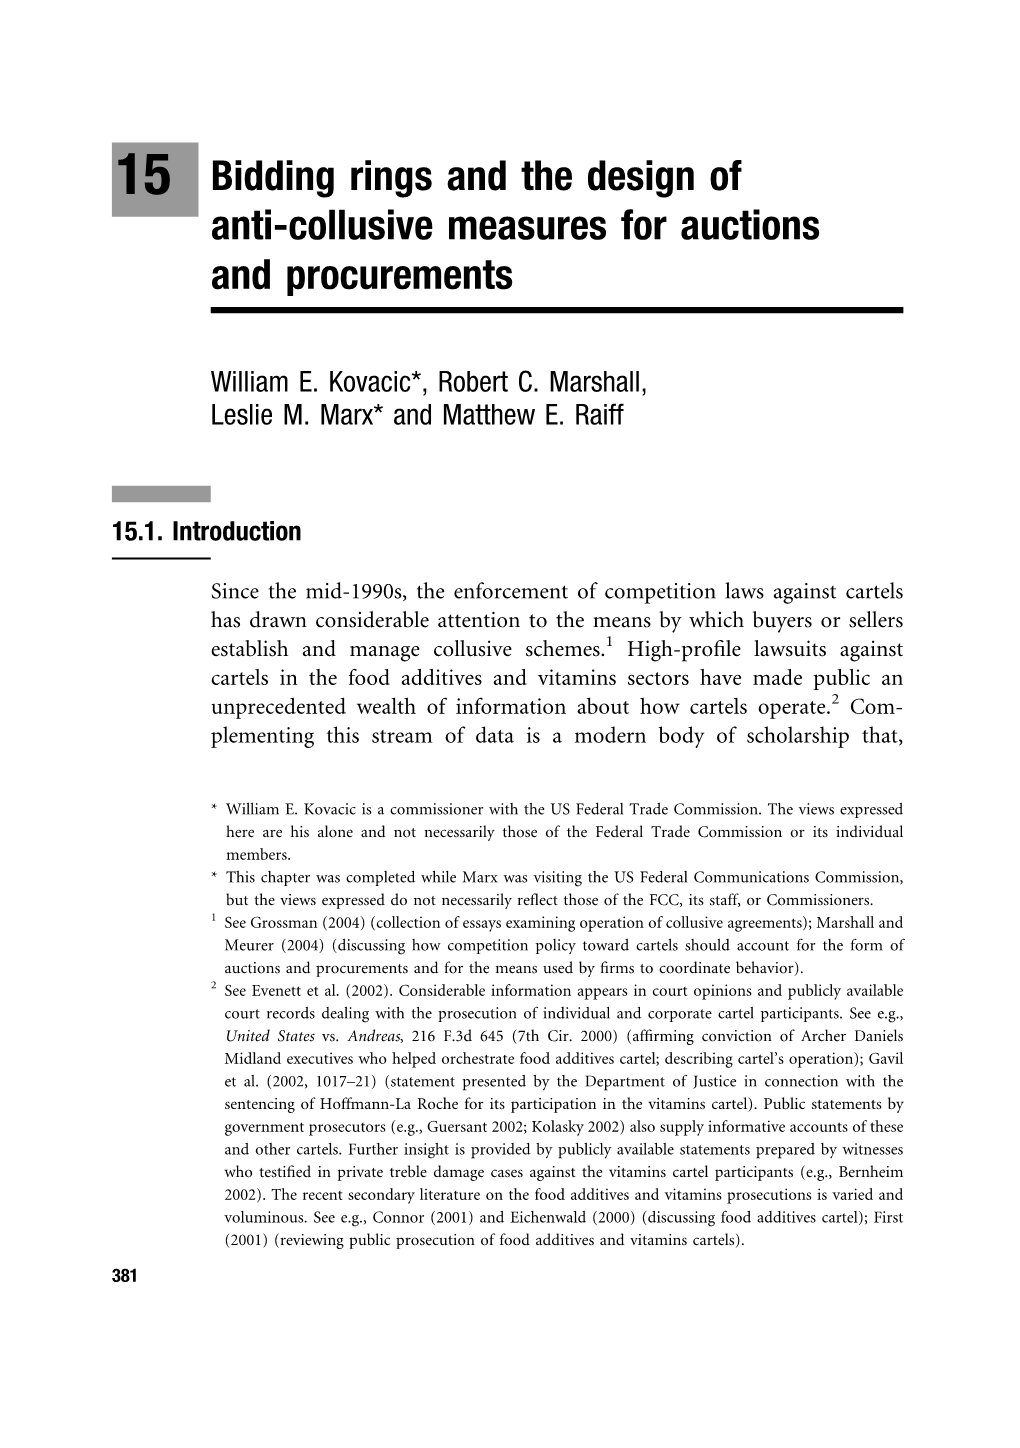 15 Bidding Rings and the Design of Anti-Collusive Measures for Auctions and Procurements